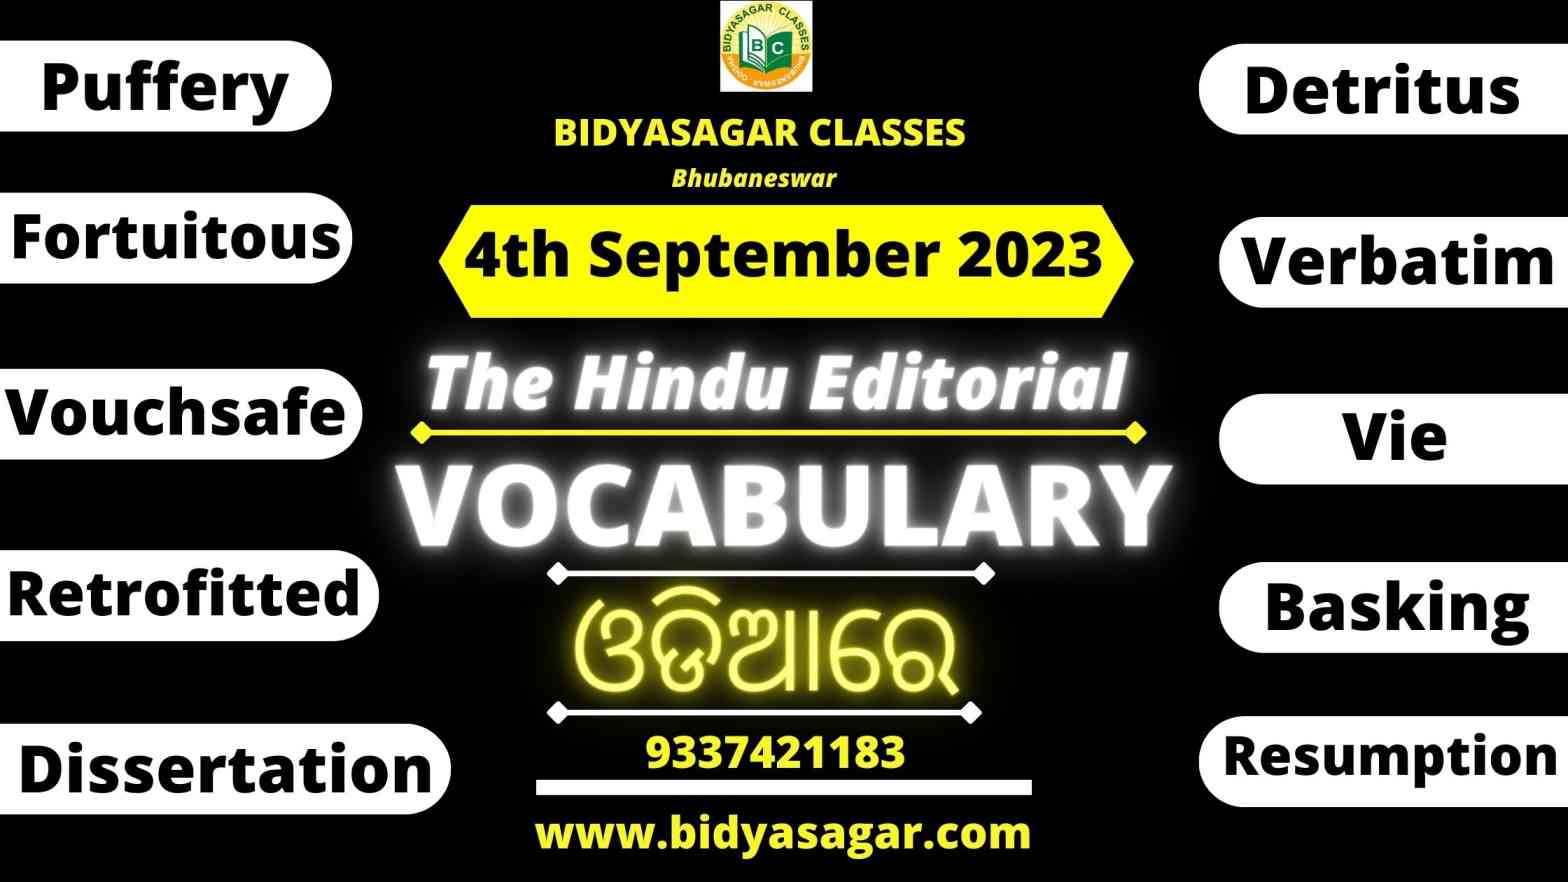 The Hindu Editorial Vocabulary of 4th September 2023